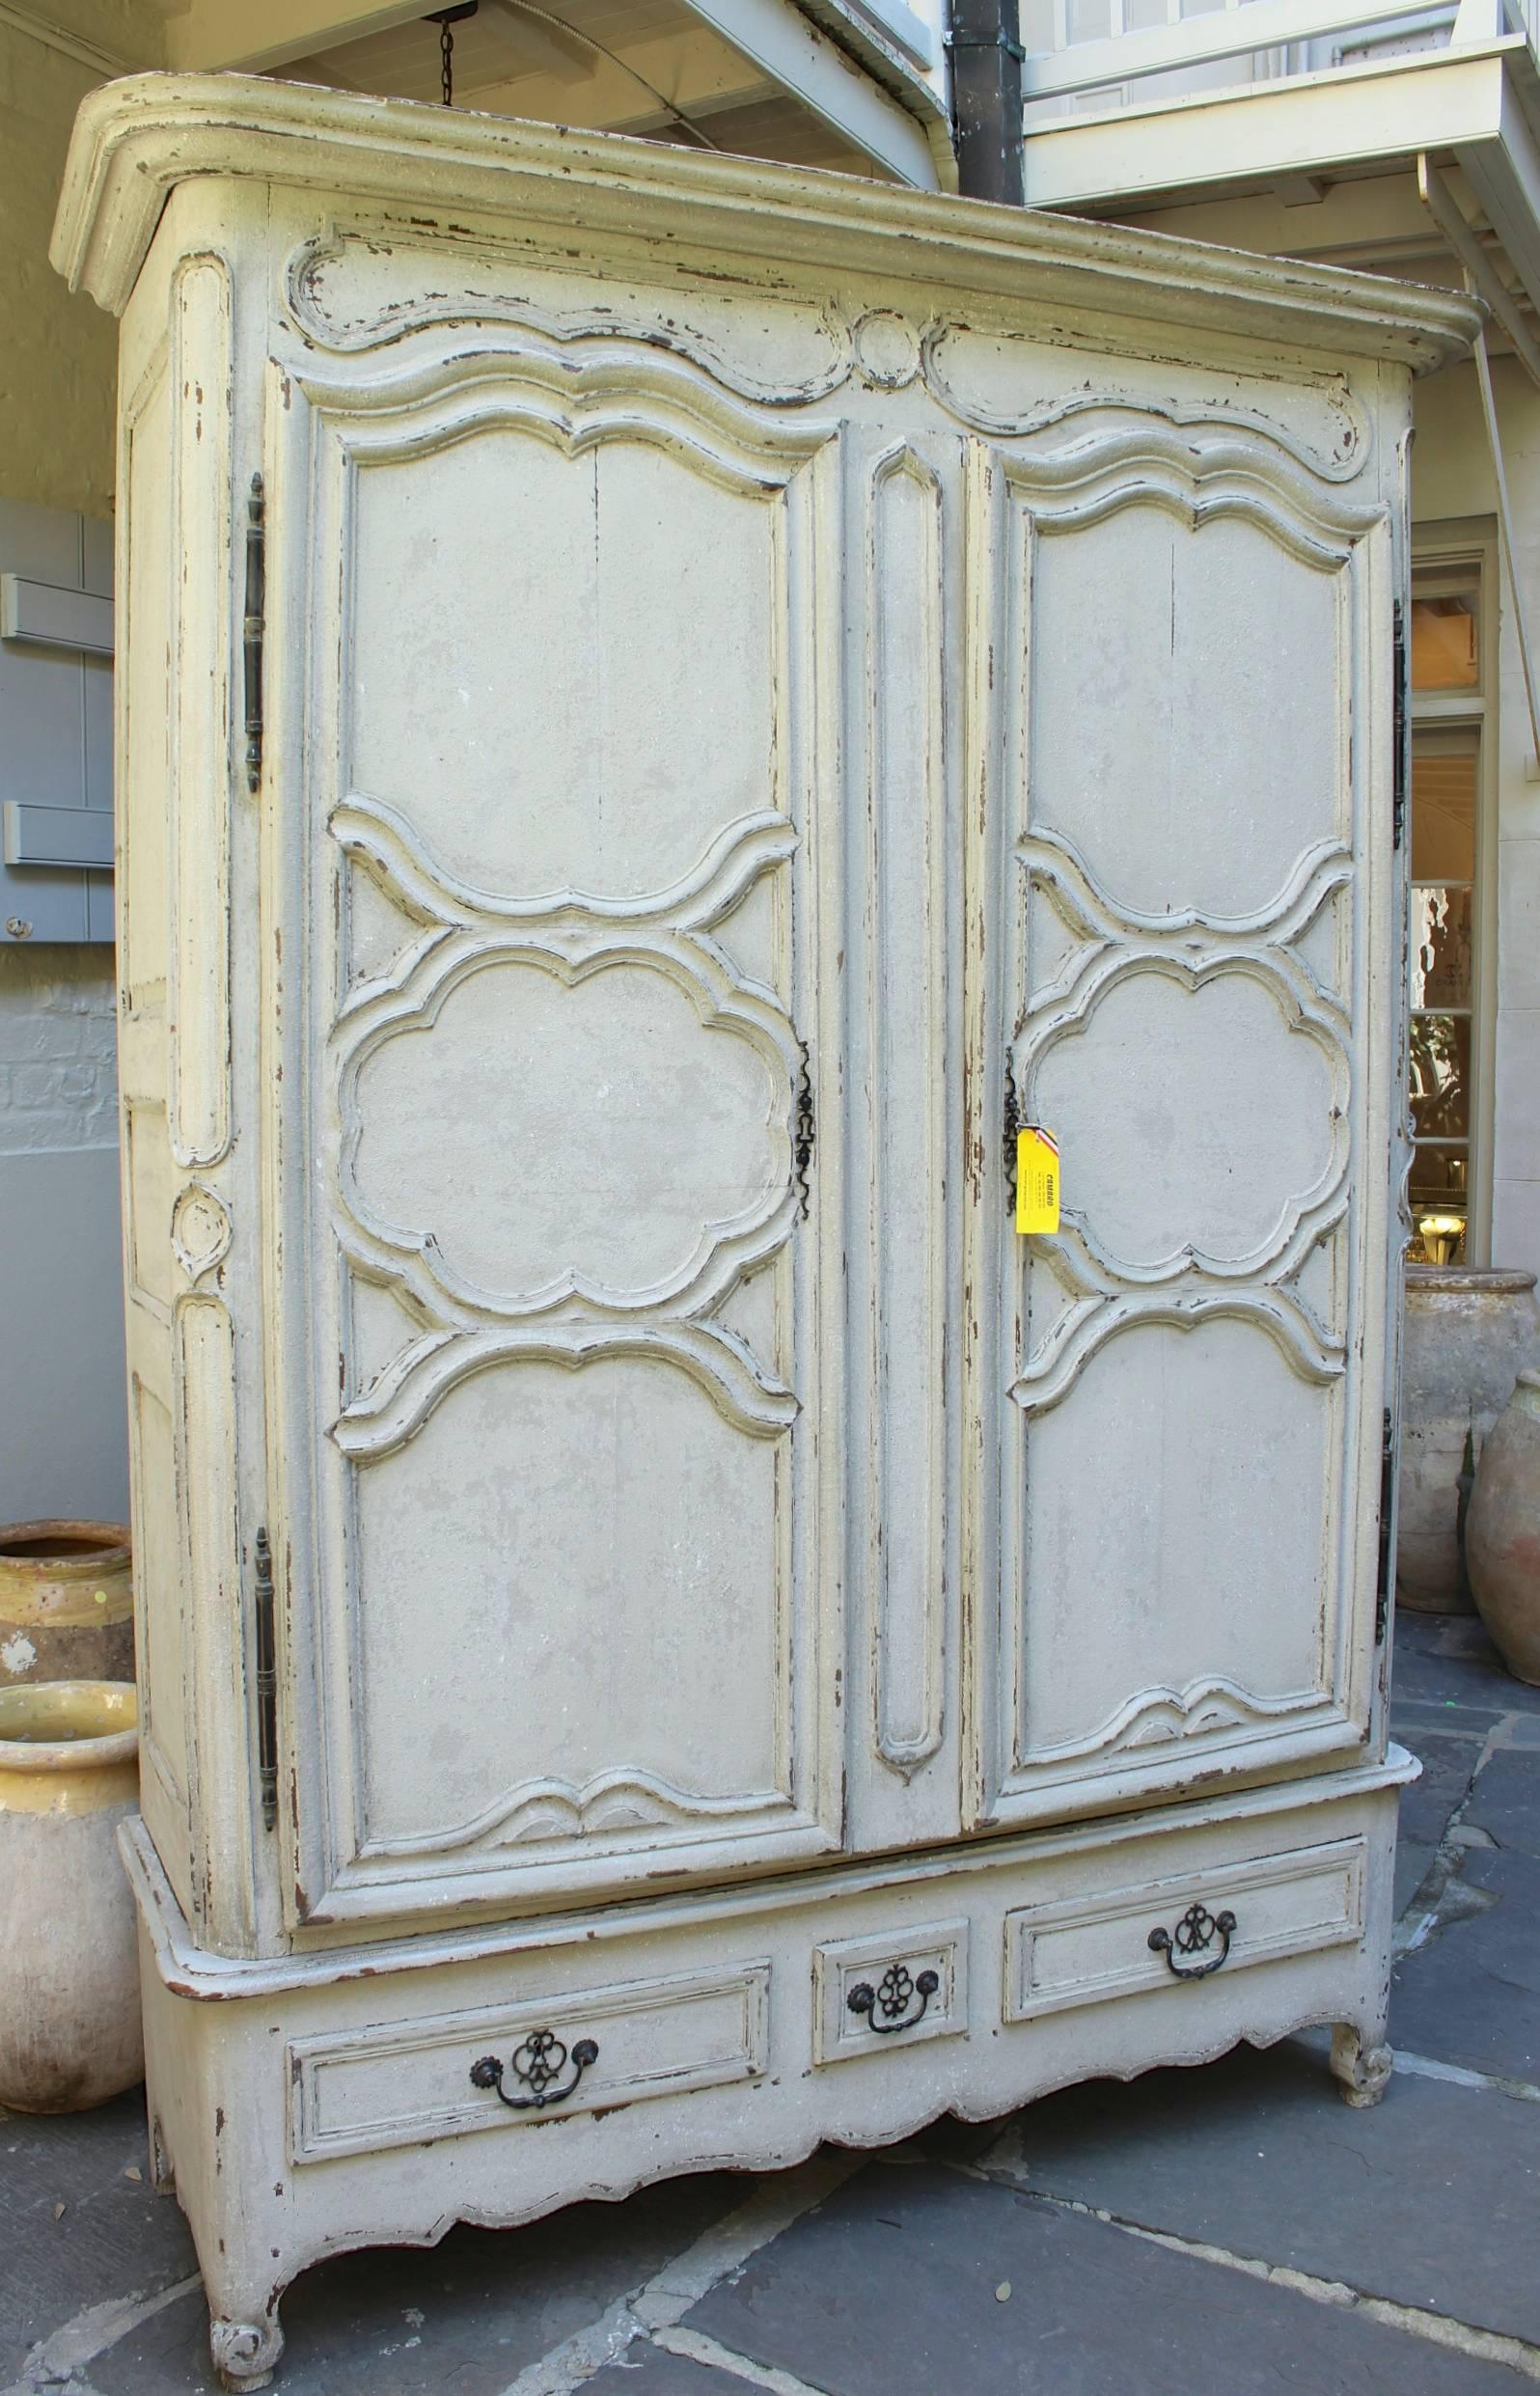 Antique French Regence style Armoire with hand-carved wood details.
End of 18th / Beginning of 19th century style with original pewter hinges and 3 drawer base.
  